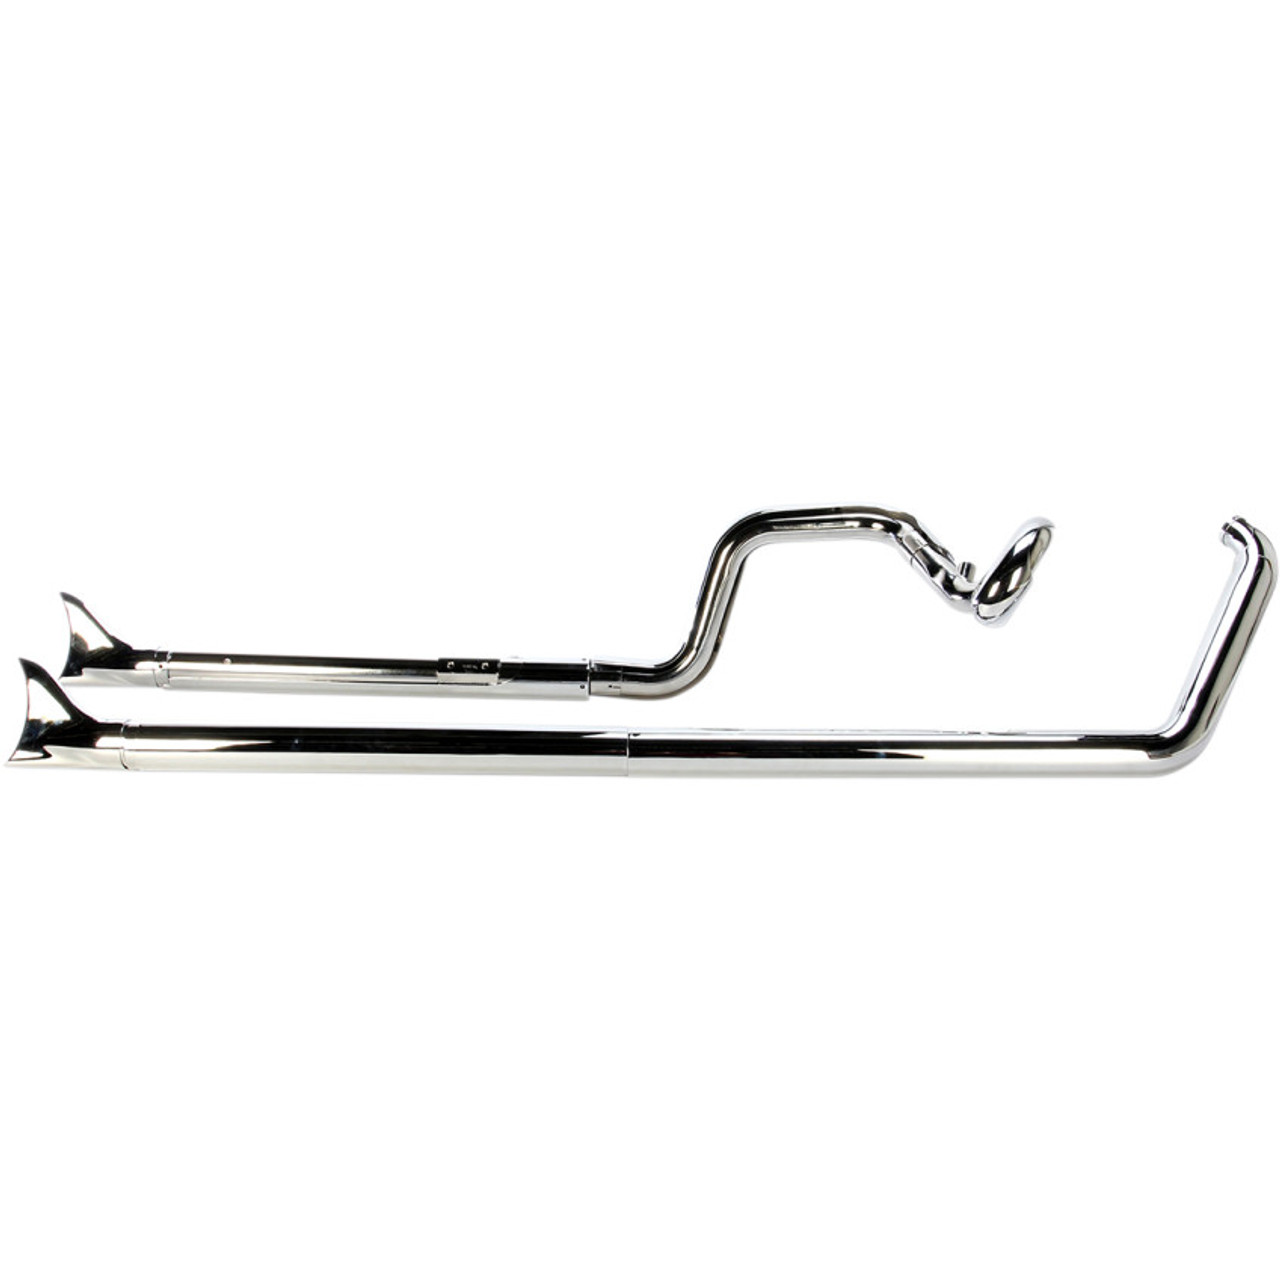 Cobra Chrome Dual Exhaust System with Fishtail Tips for 2007-2011